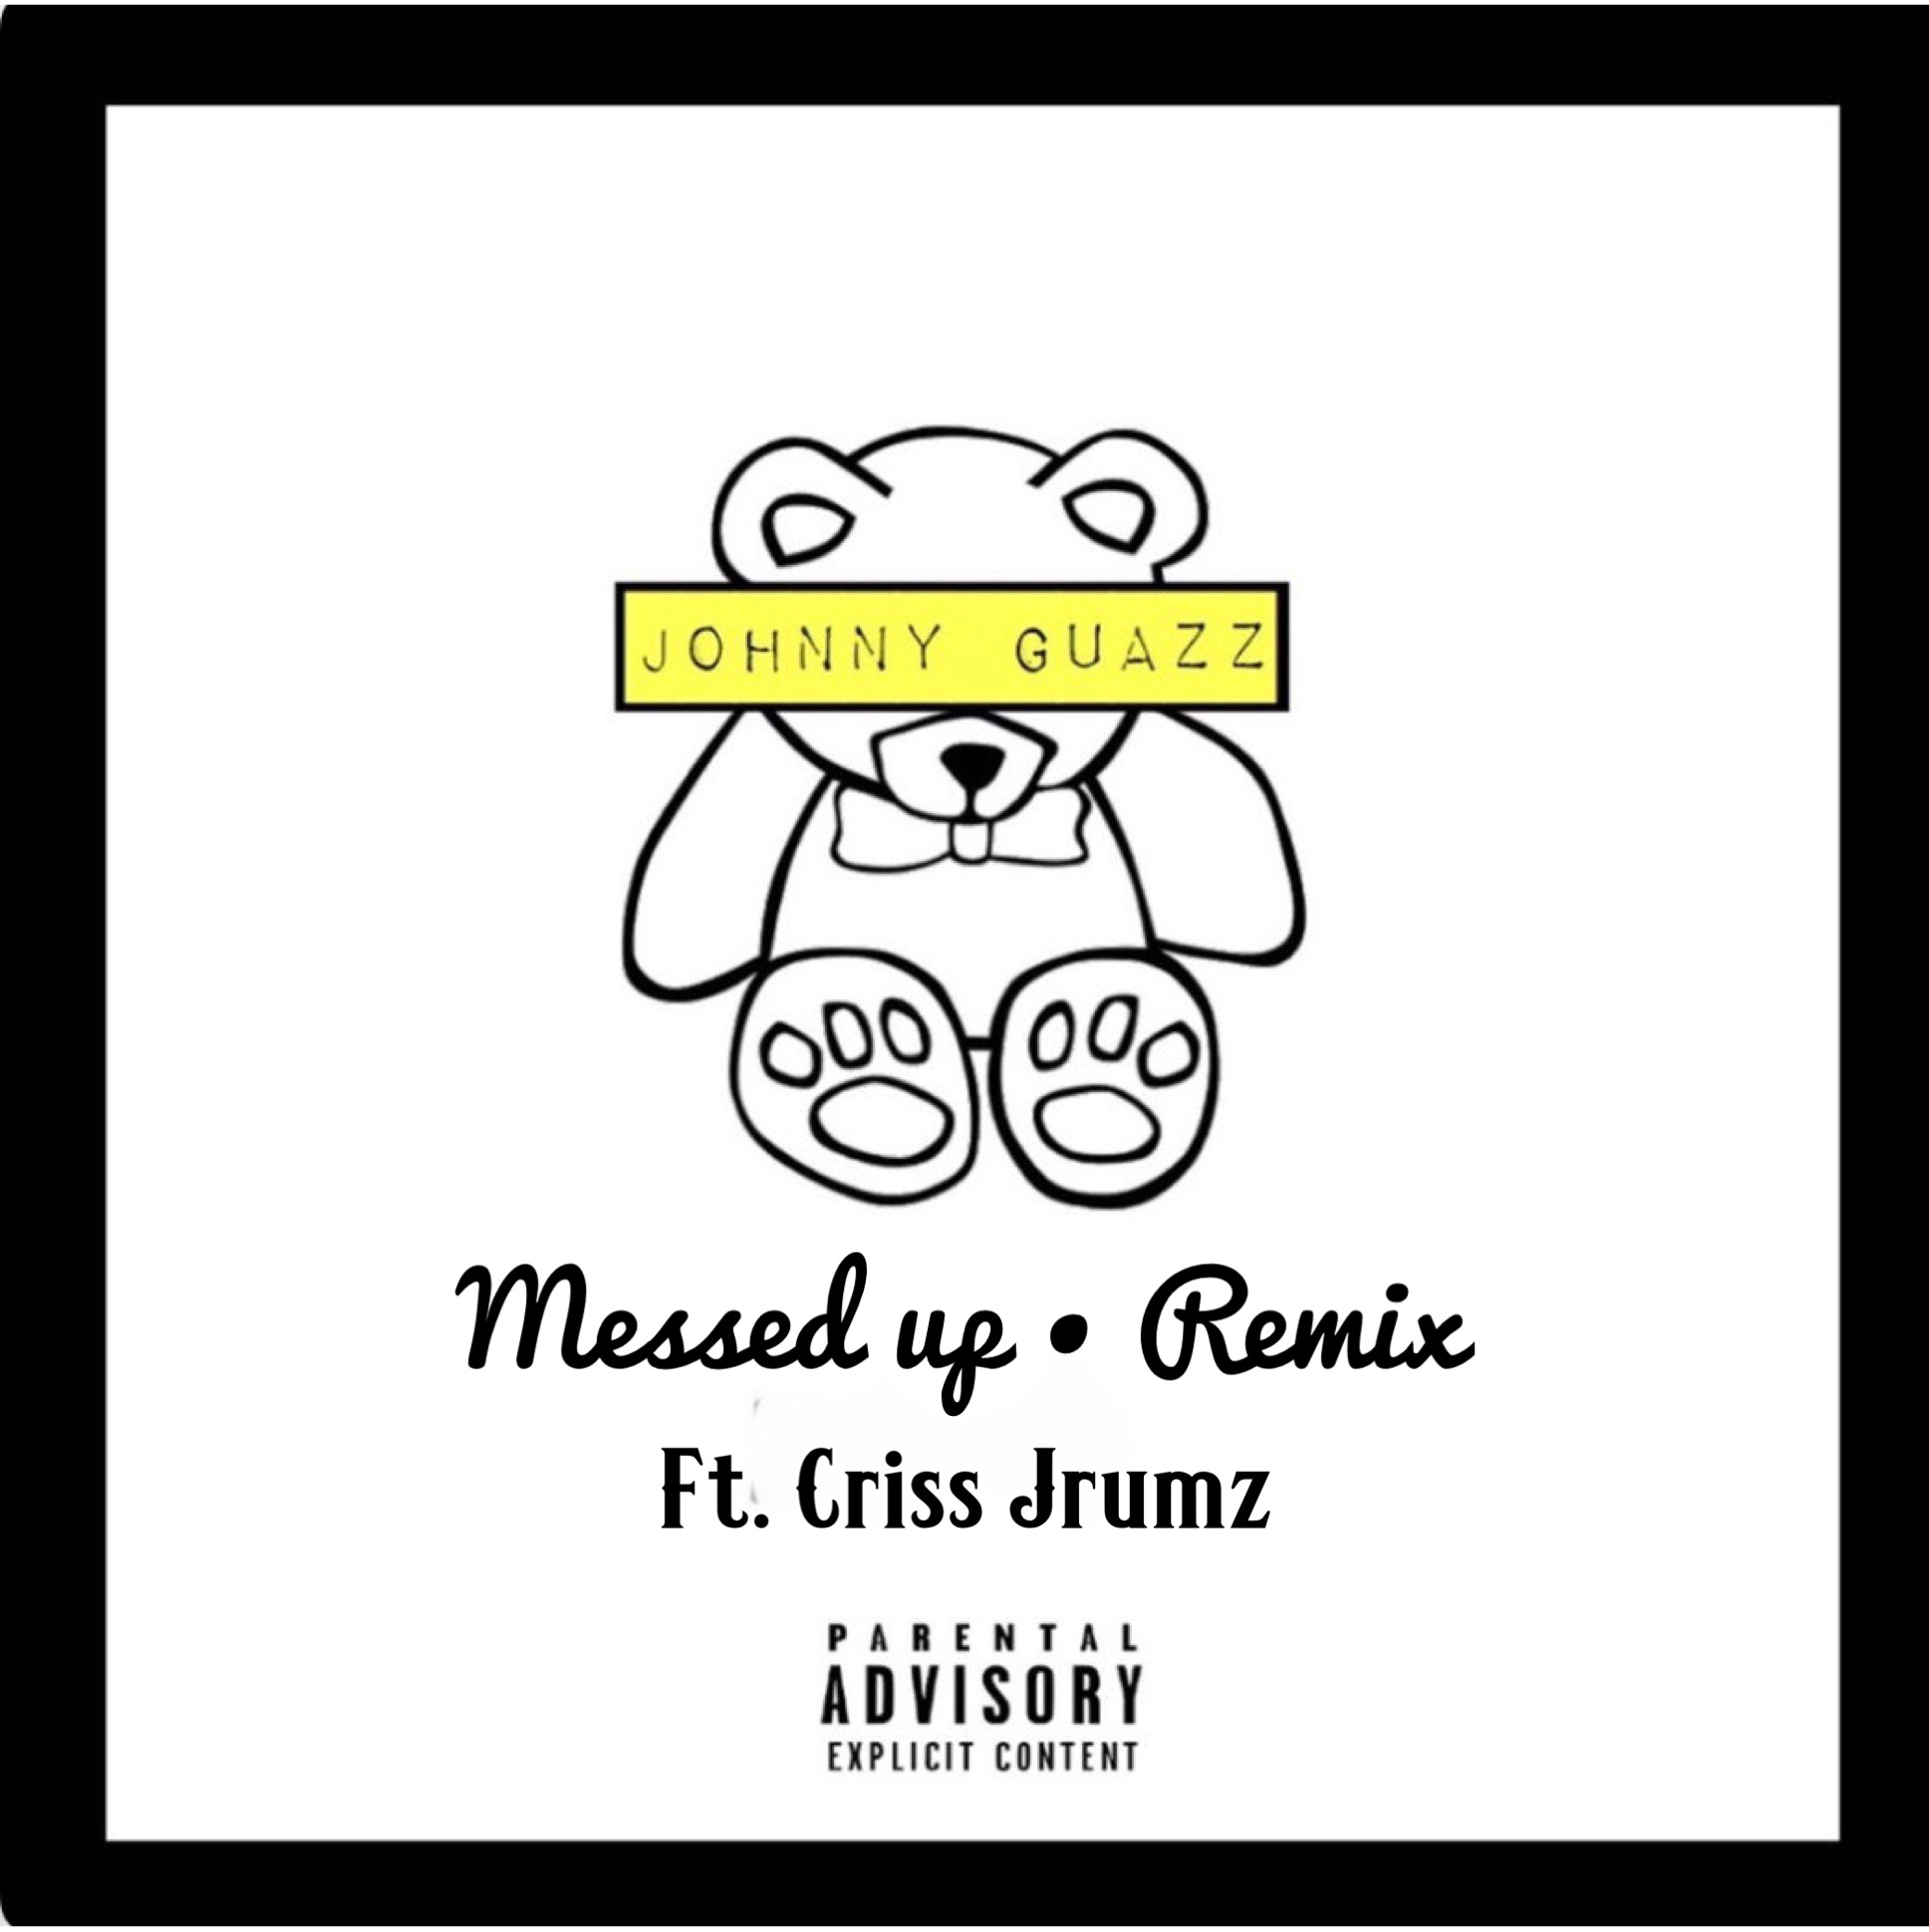 Listen To Johnny Guazz’s “Messed Up” Remix  Feat. Criss Jrumz